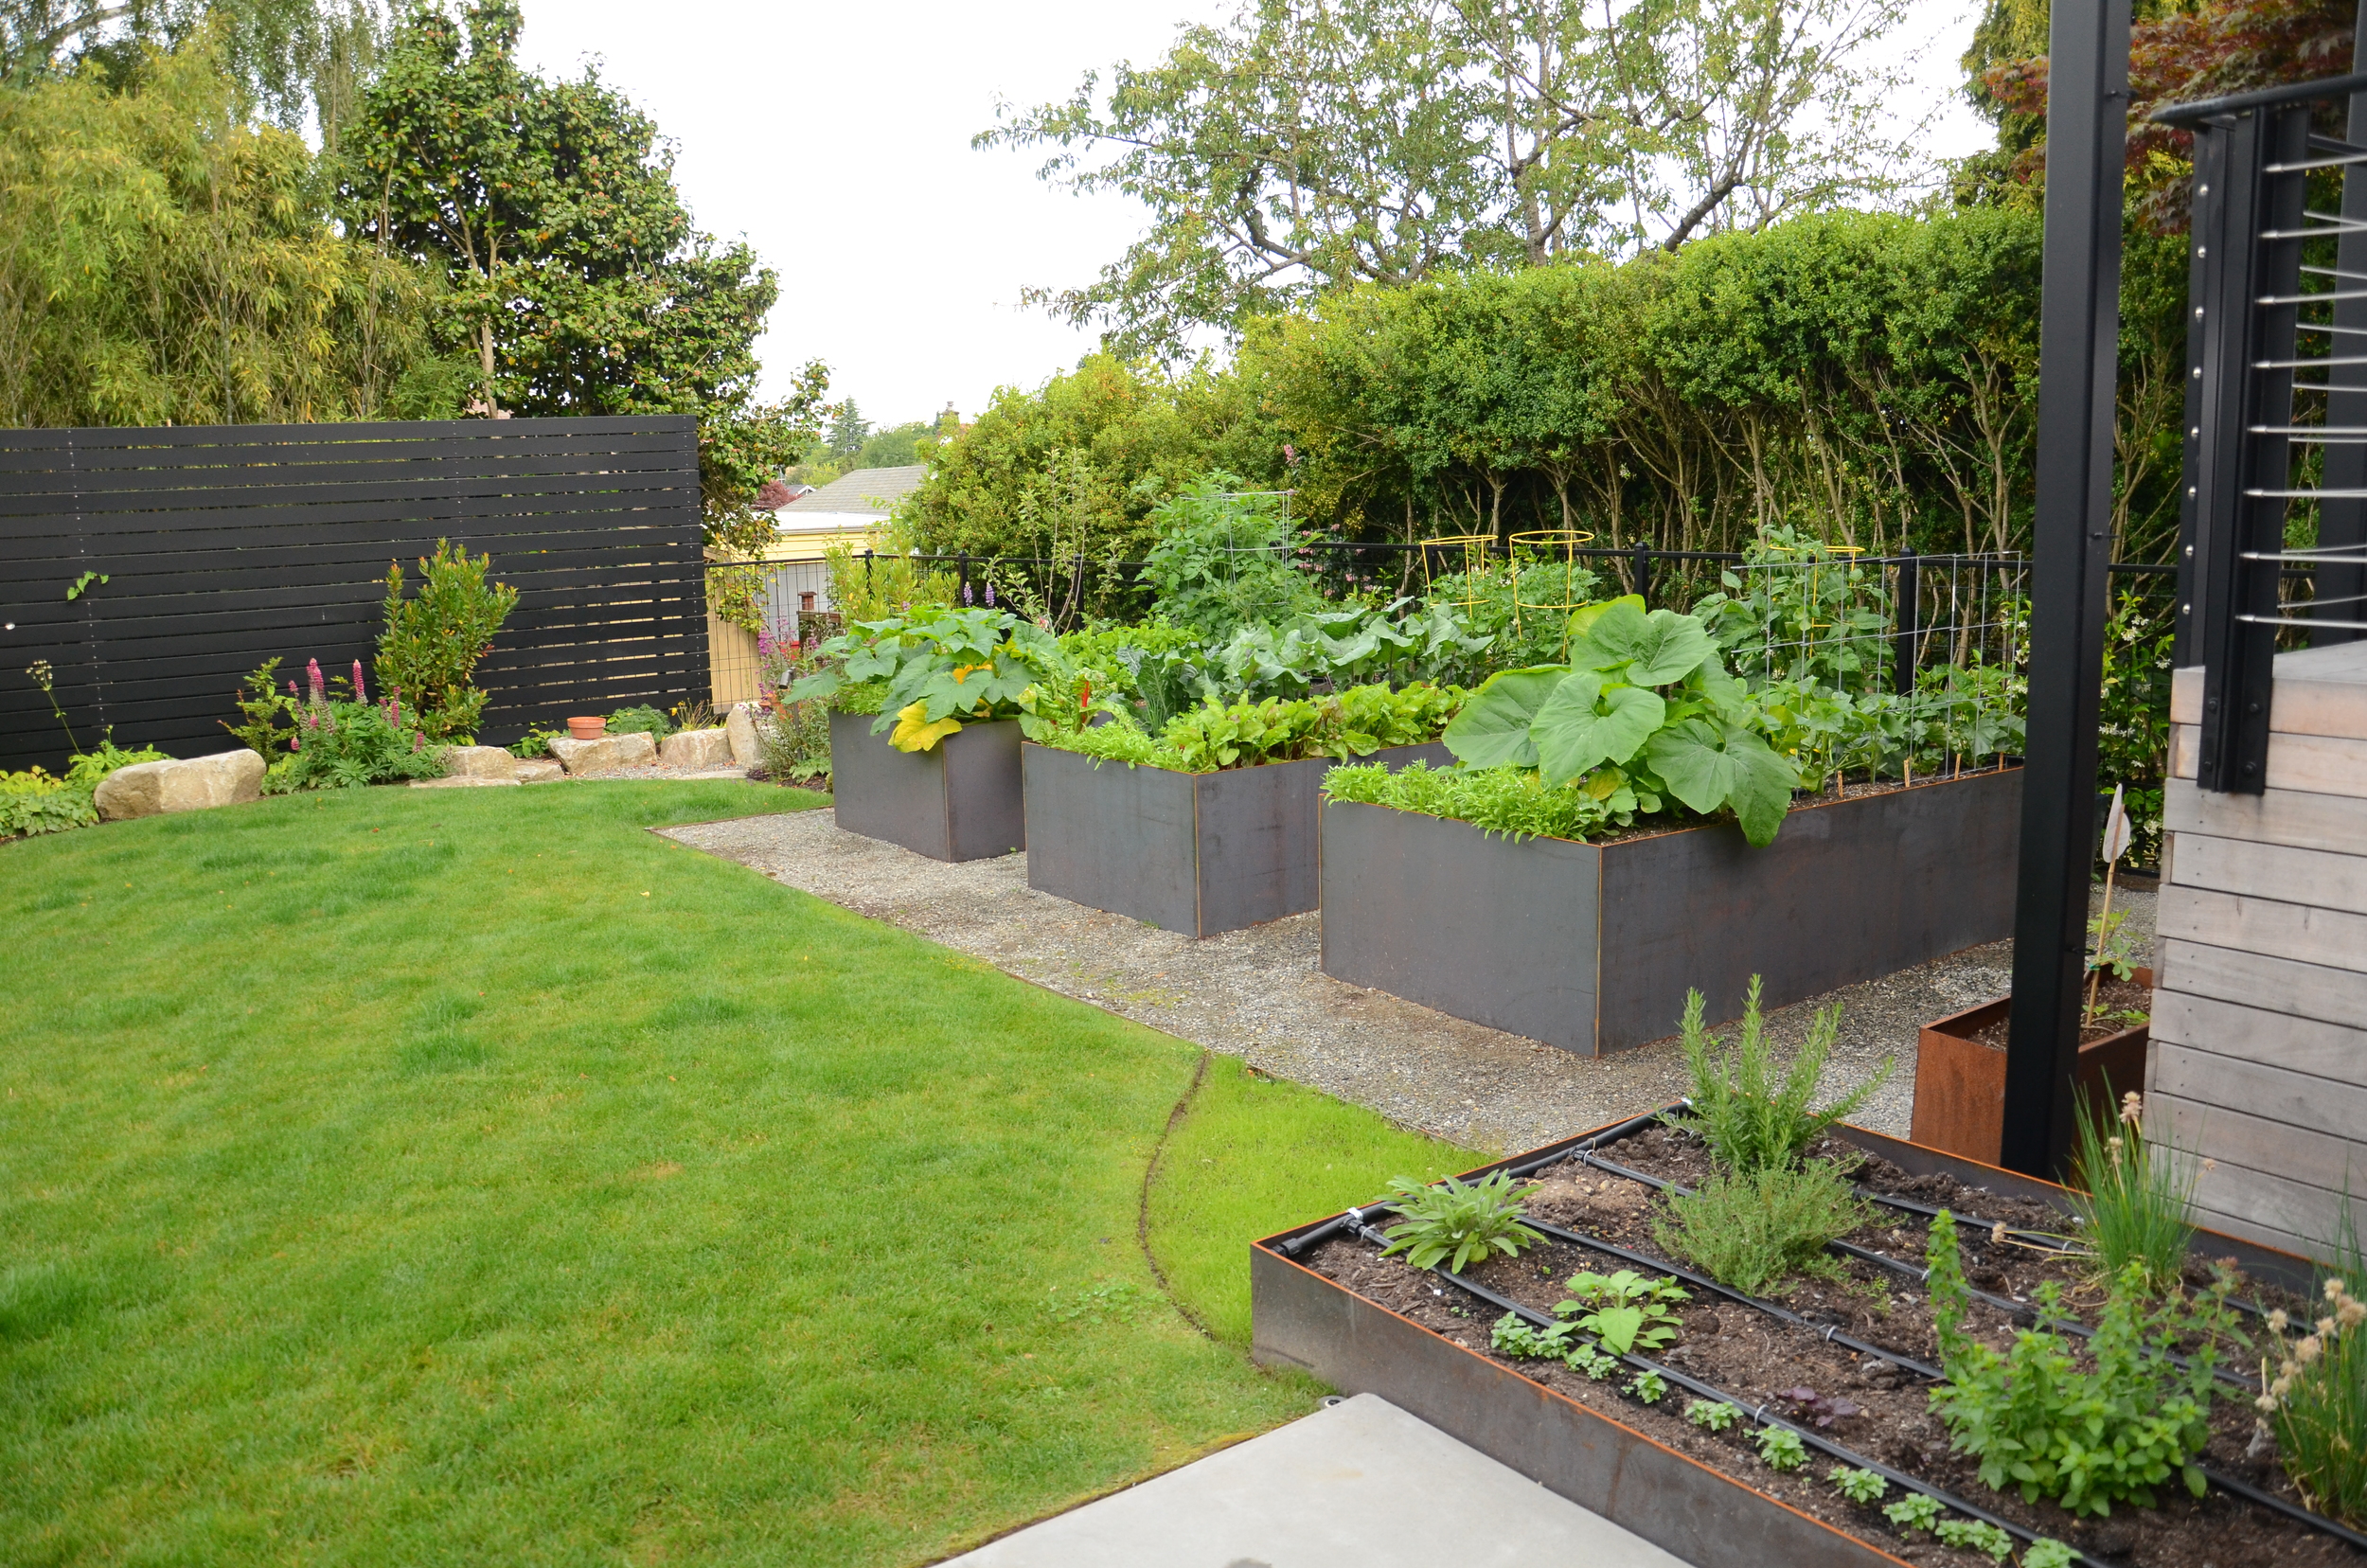 A garden with dedicated spaces for annual vegetables, perennial herbs, and ornamentals